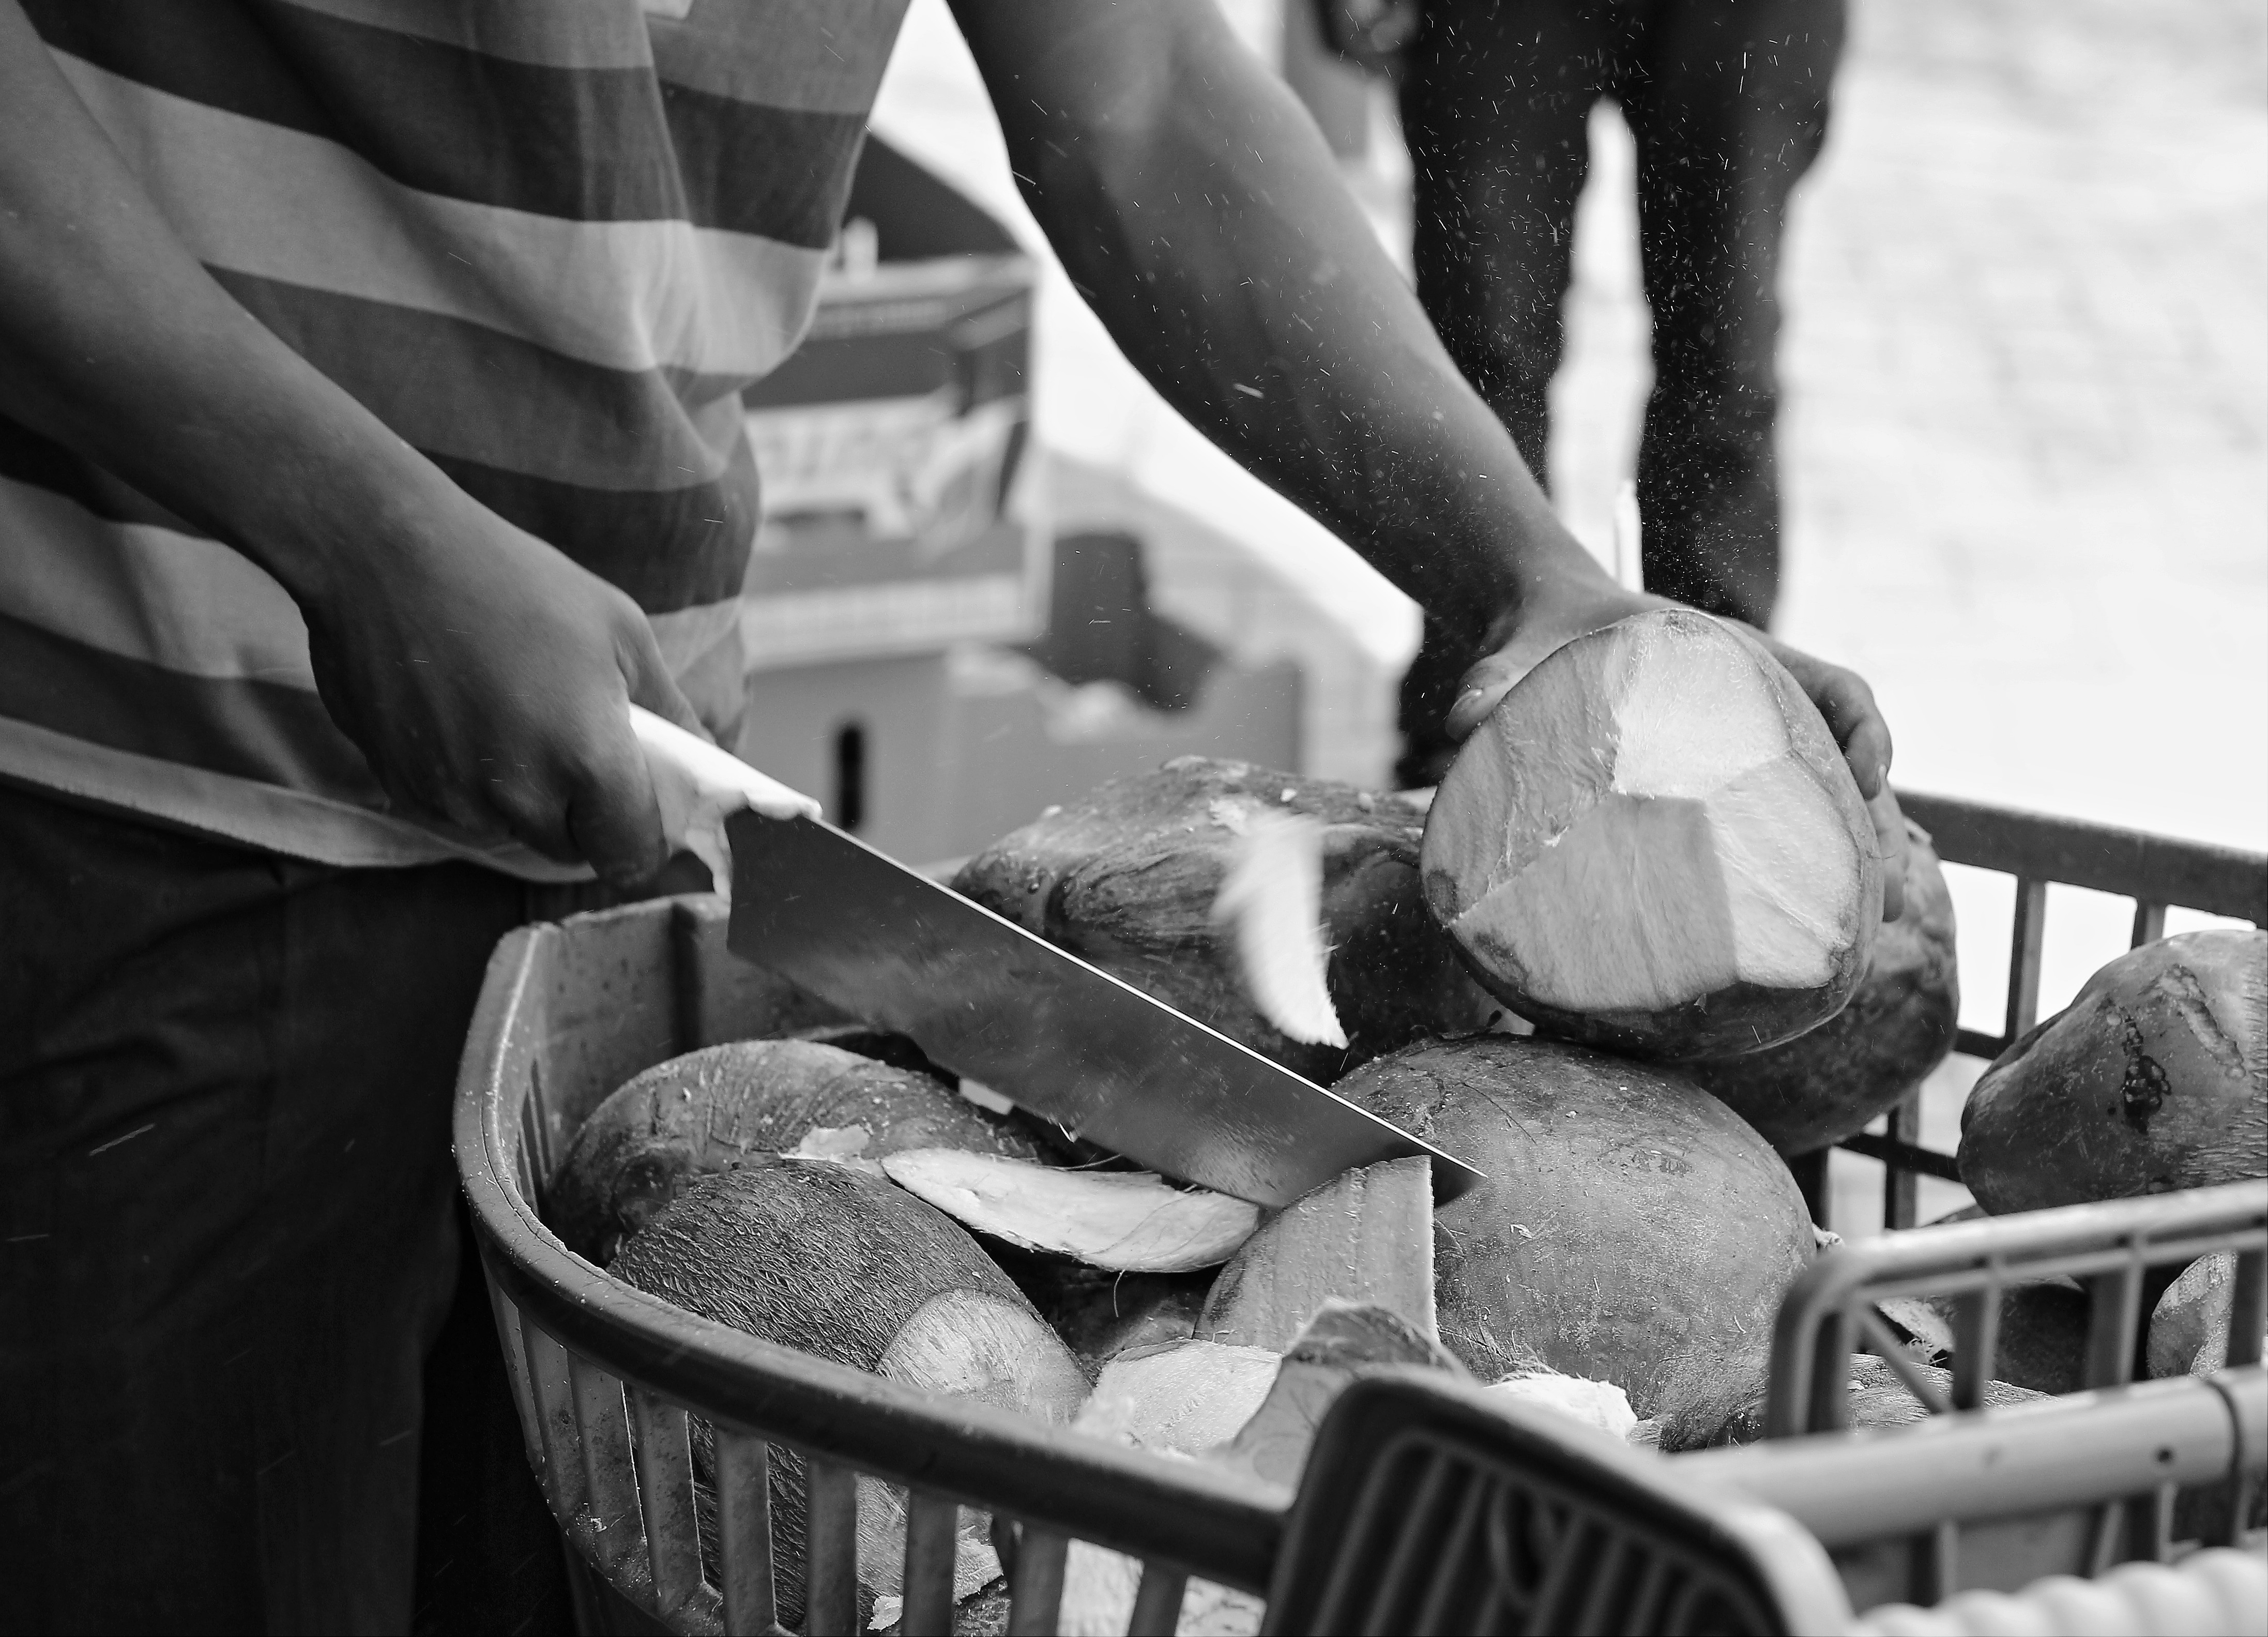 A man makes his living opening and selling coconuts on the street (Fordsburg, 2015)